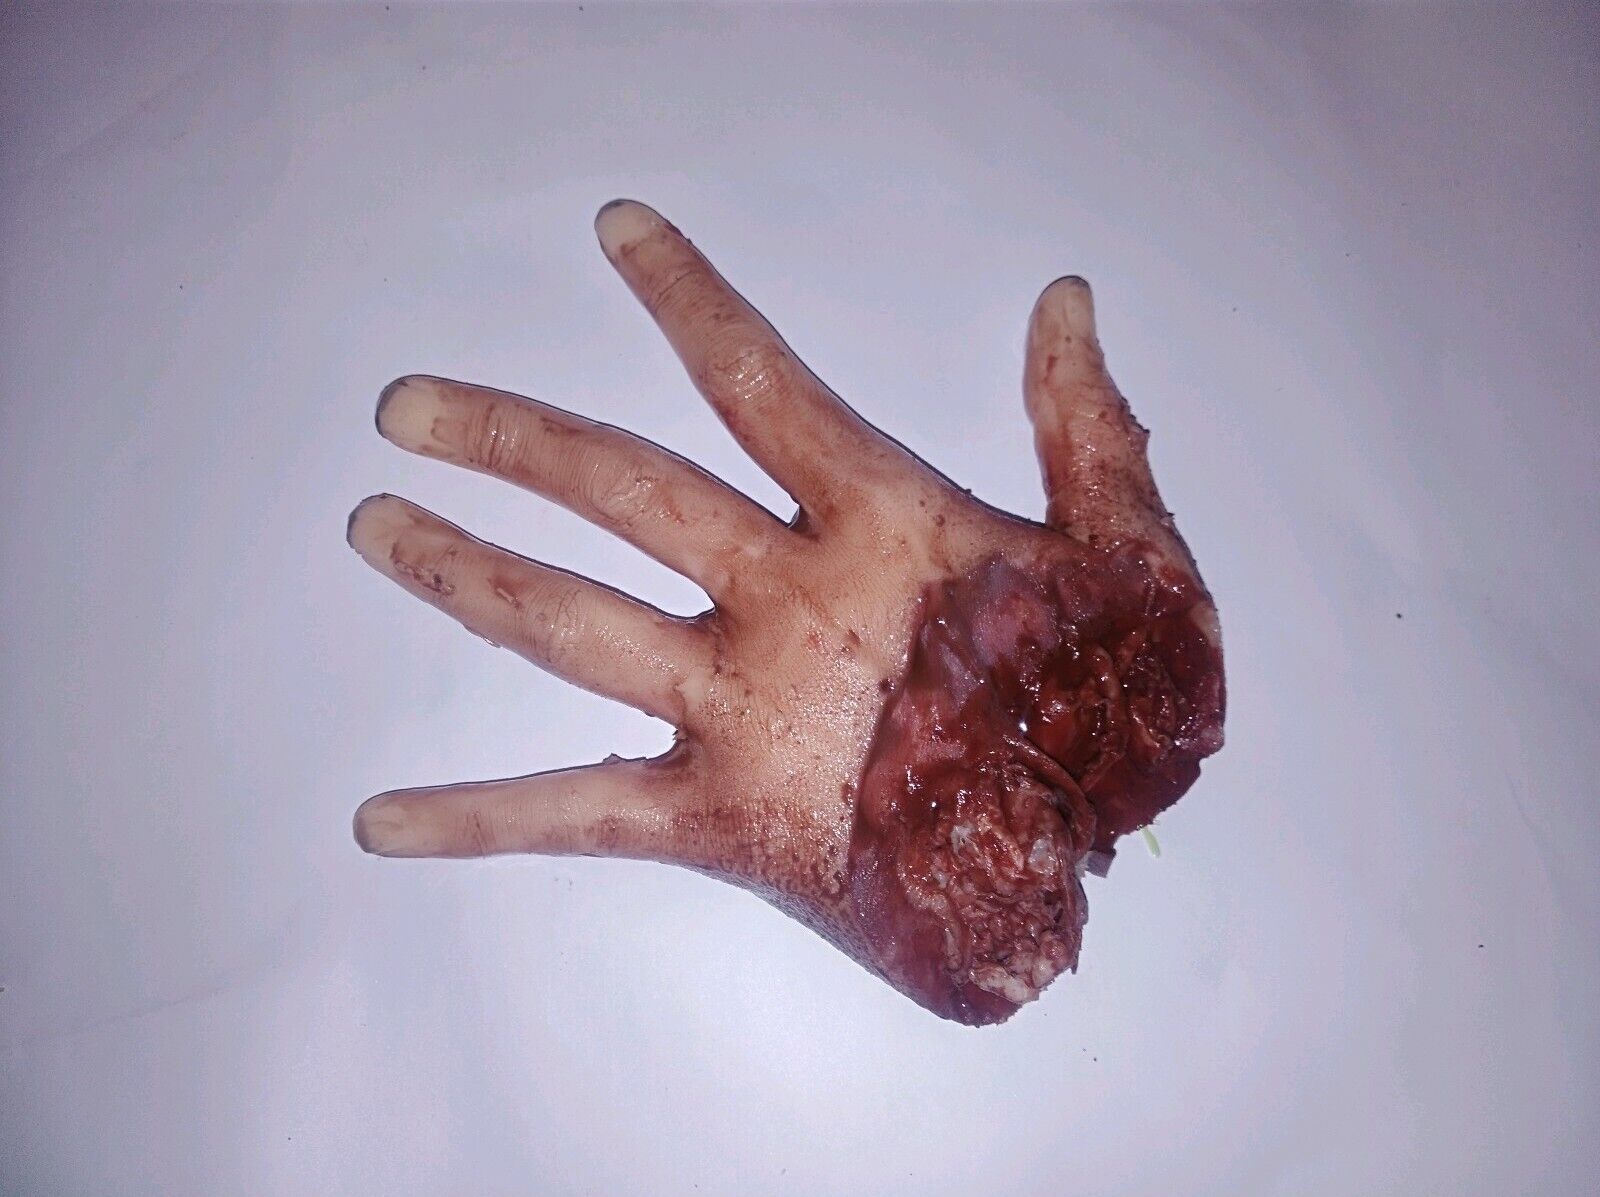 Silicone HORROR PROP severed female hand movie quality gore blood zombie dead 